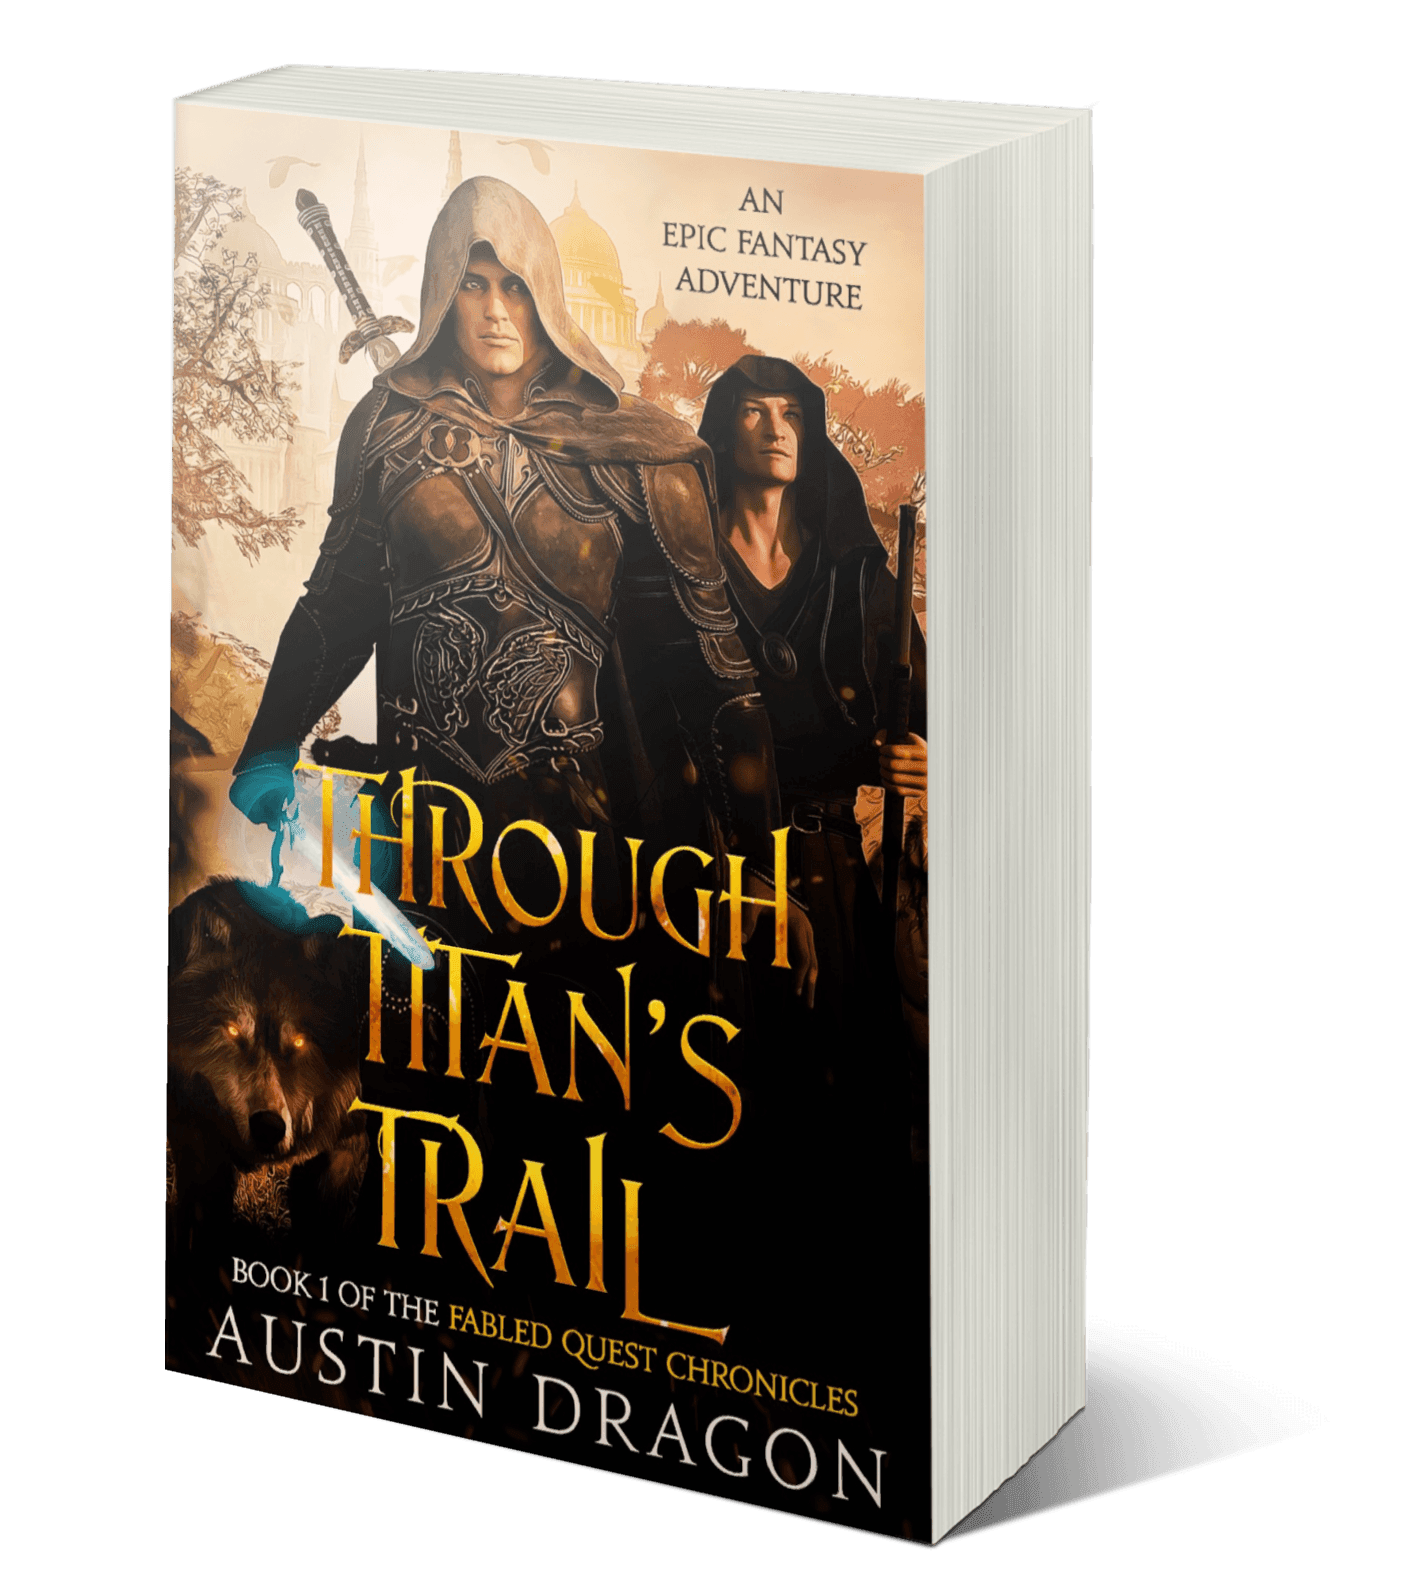 Through Titan's Trail (Fabled Quest Chronicles, Book 1) Paperback